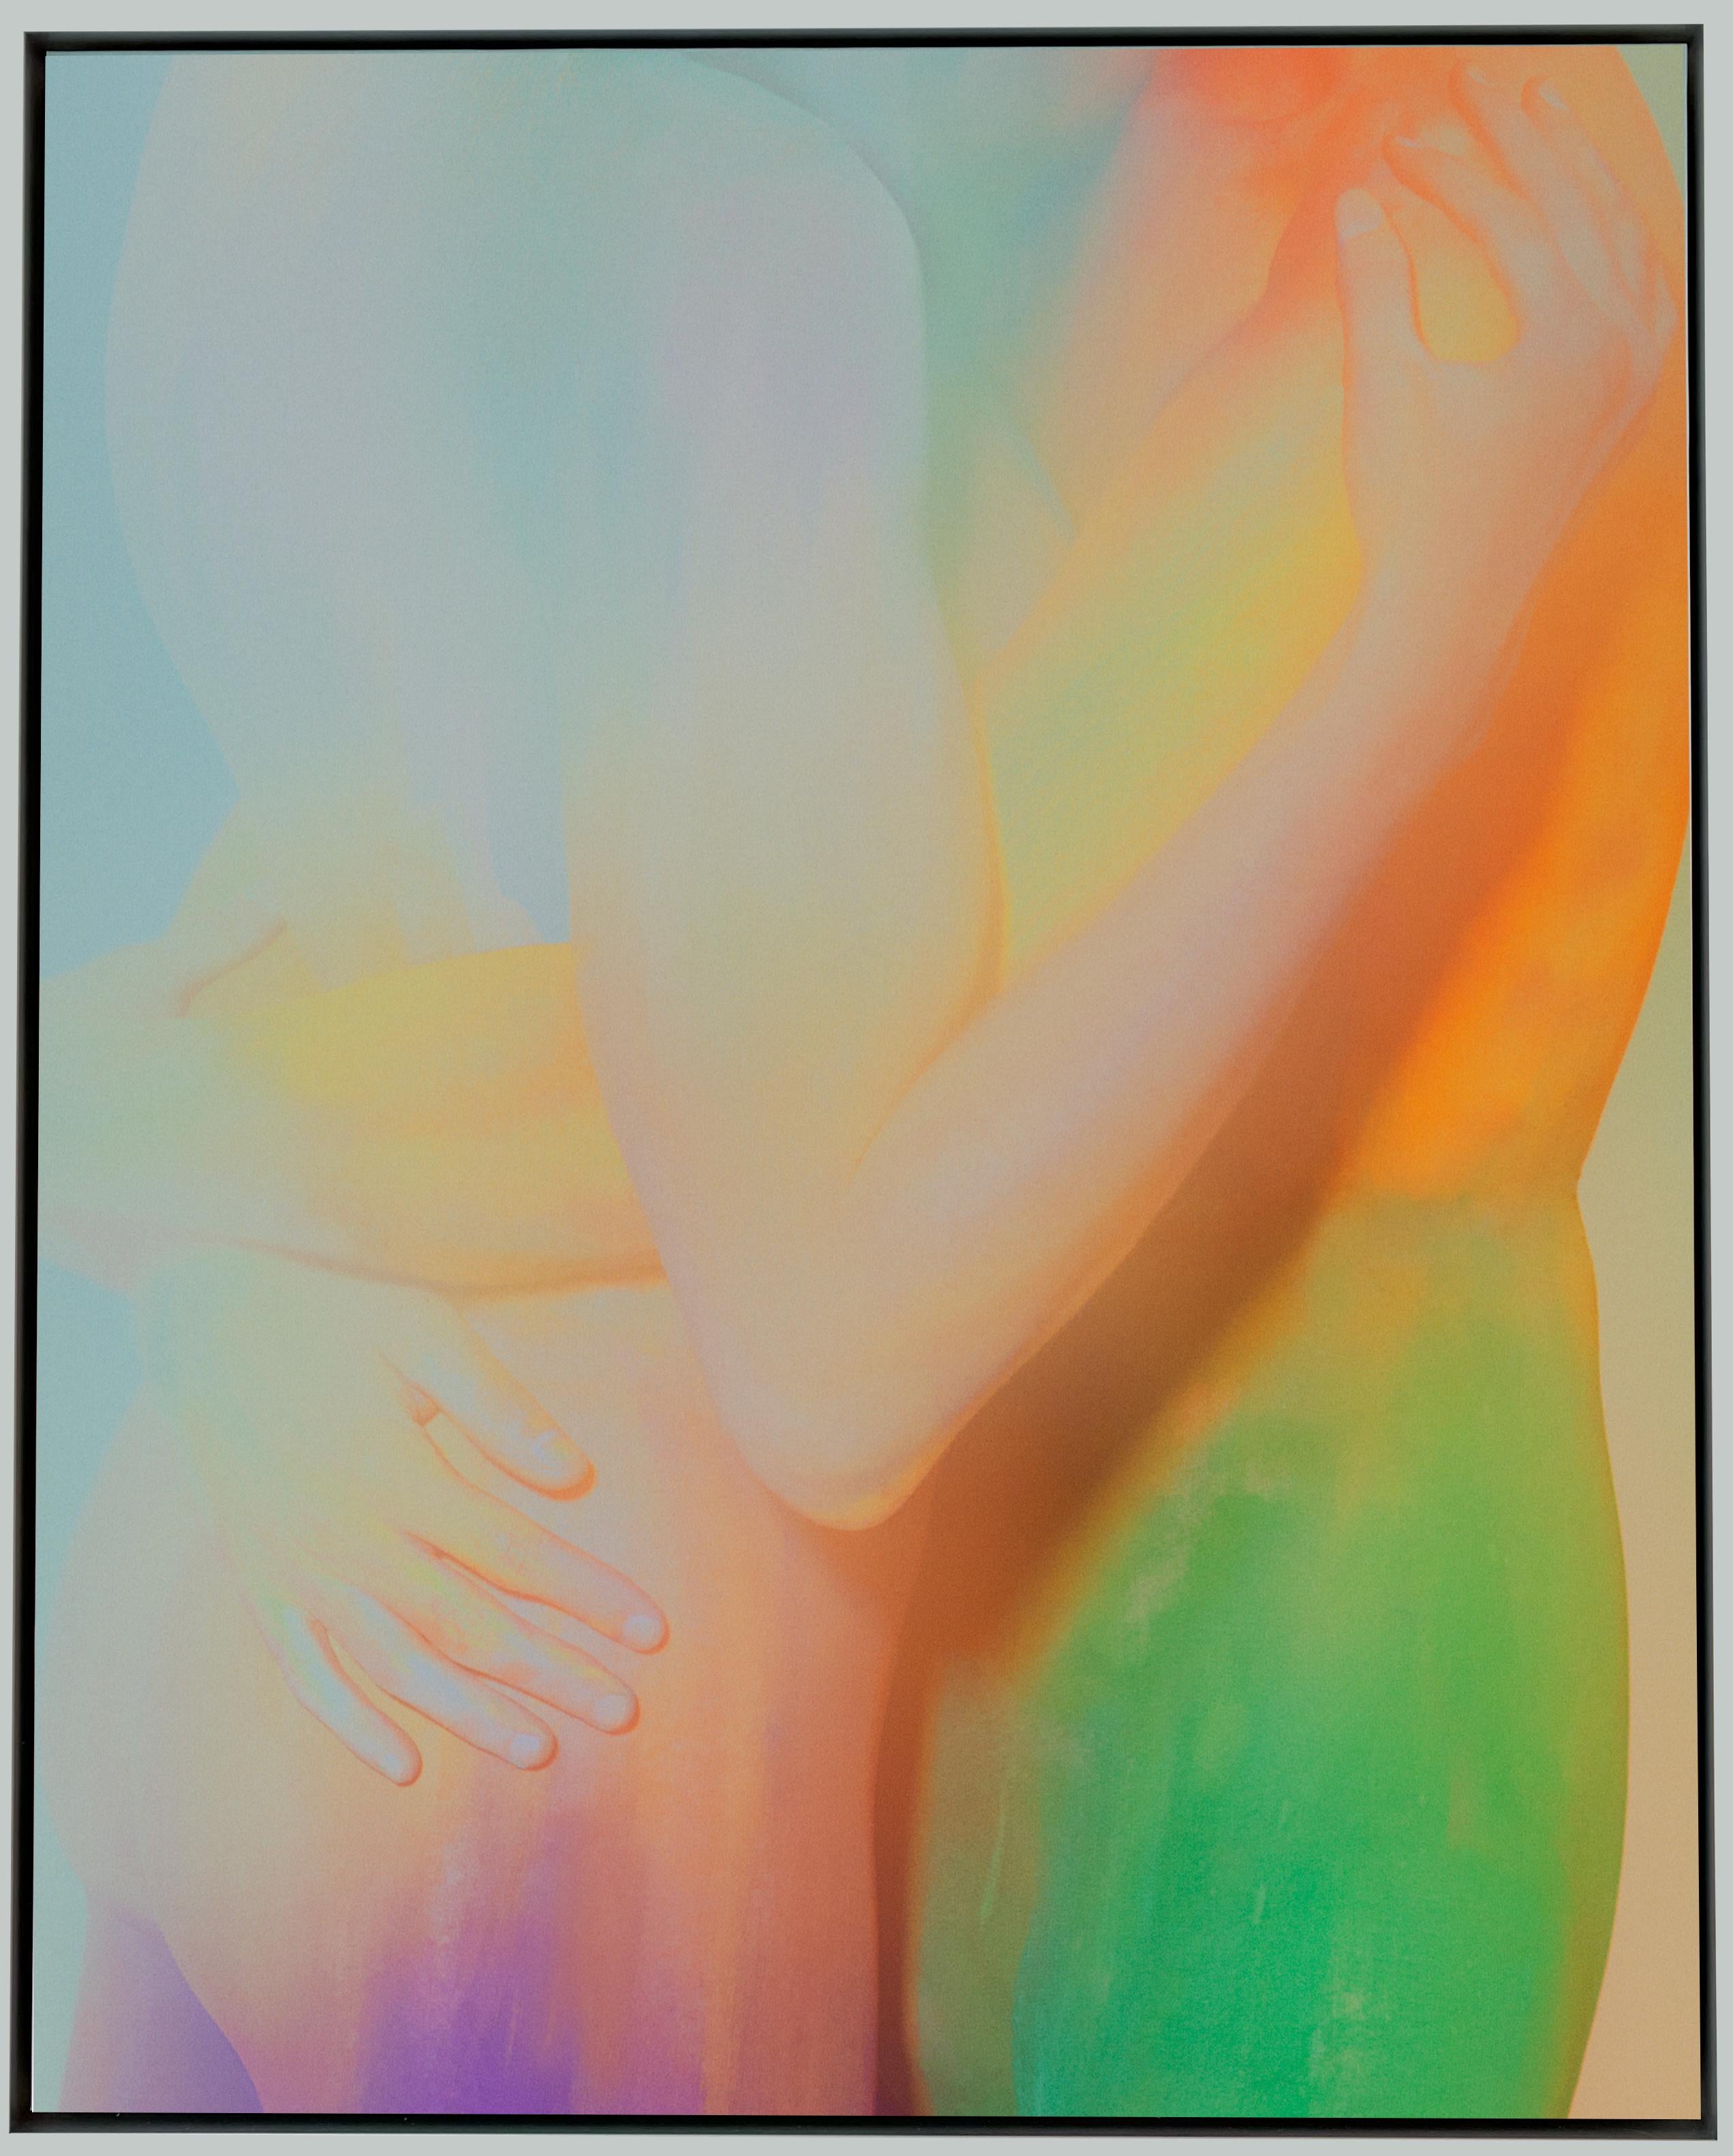 In this series titled ‘Adam and Adam’, I return to the genesis 
of love. 

The ambivalence of intertwined bodies manifests different 
states of love within this couple of men. Love takes on 
multiple angles, whether it be tender, passionate,